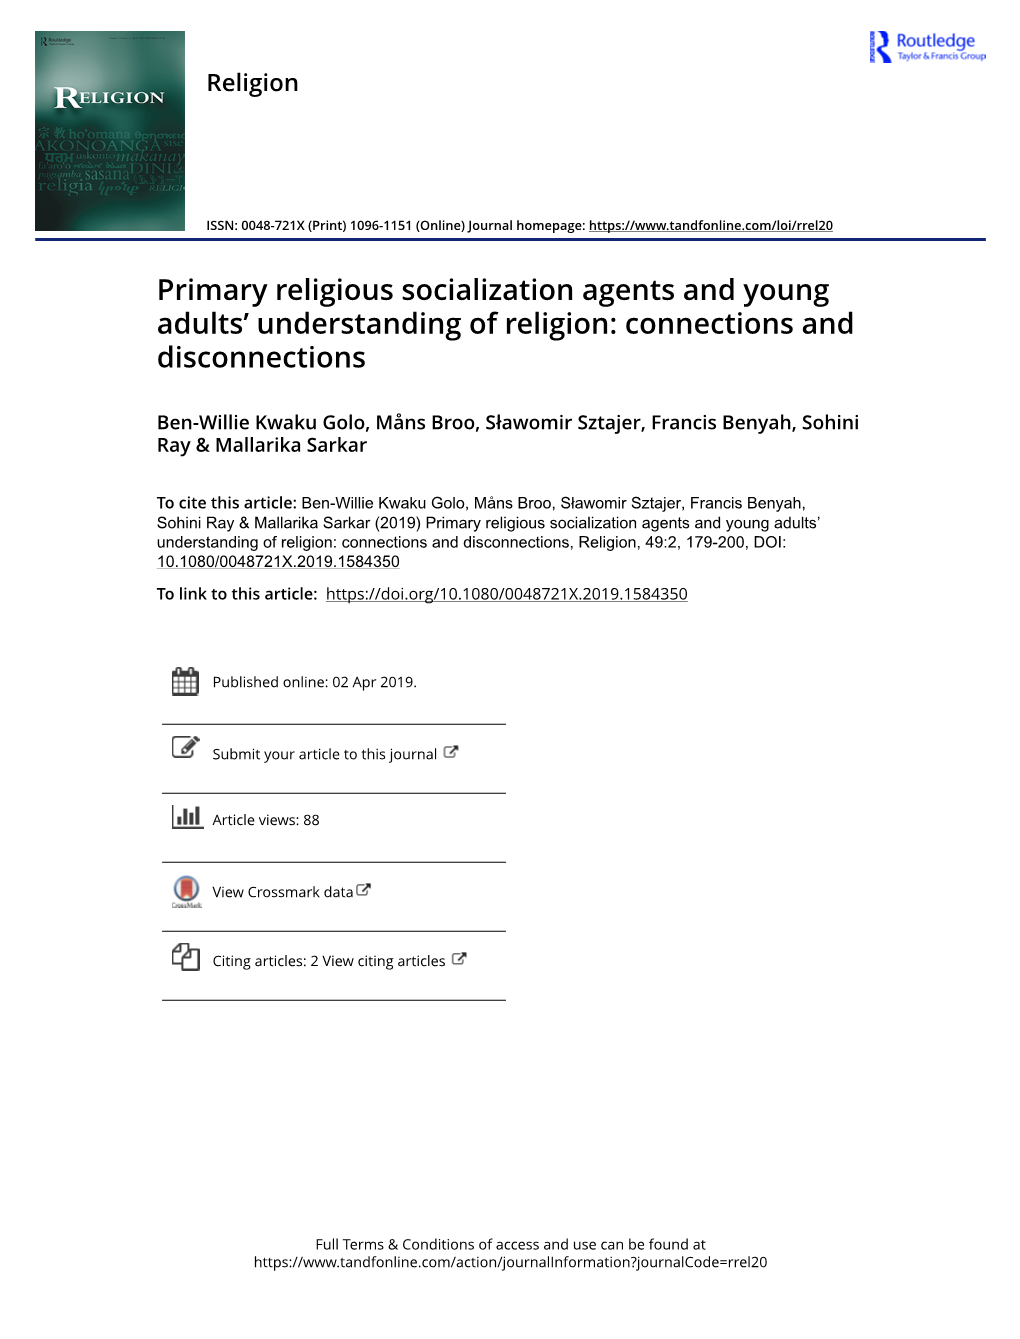 Primary Religious Socialization Agents and Young Adults' Understanding Of